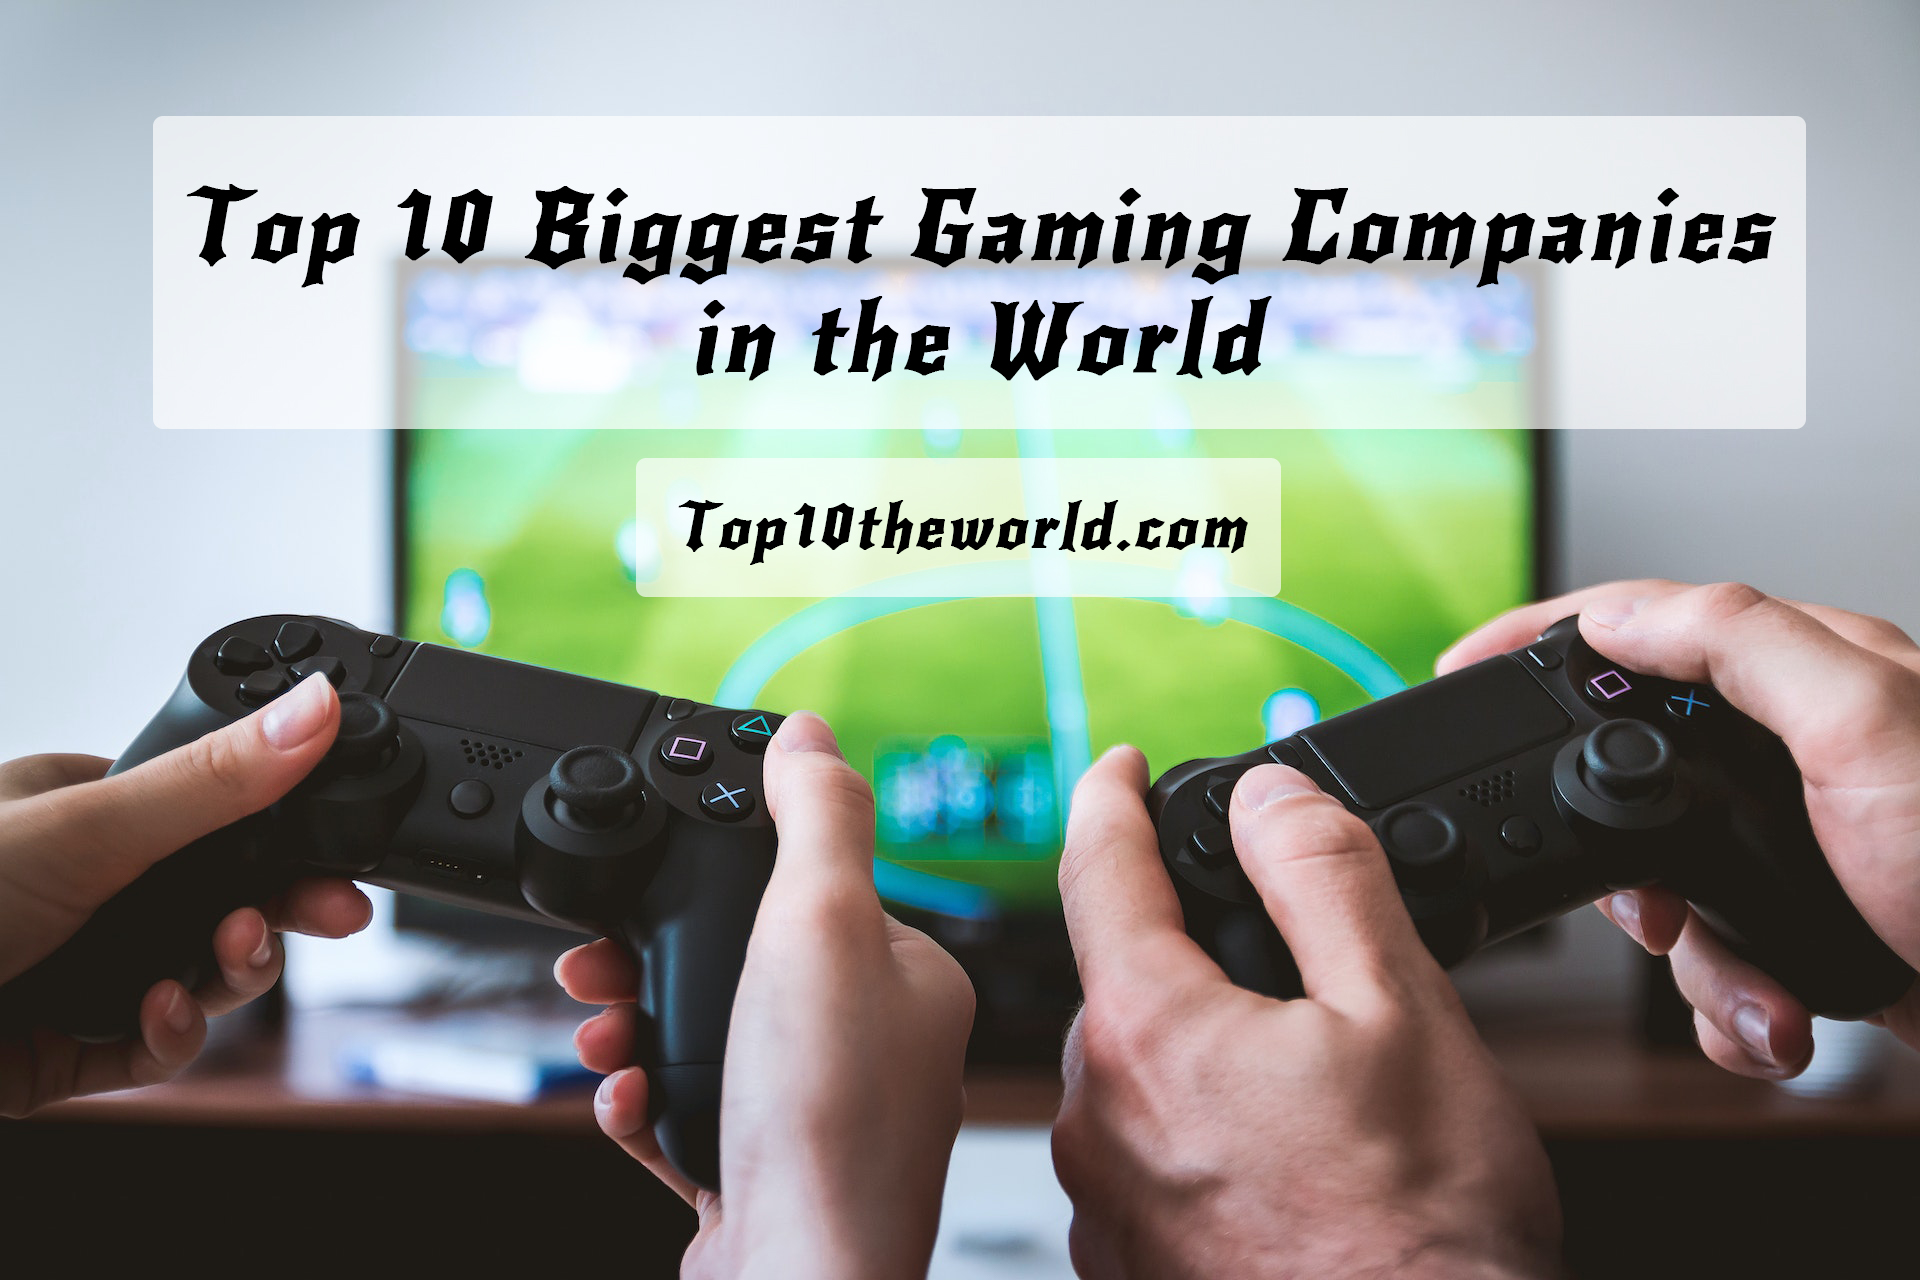 Top 10 Biggest Gaming Companies in the World